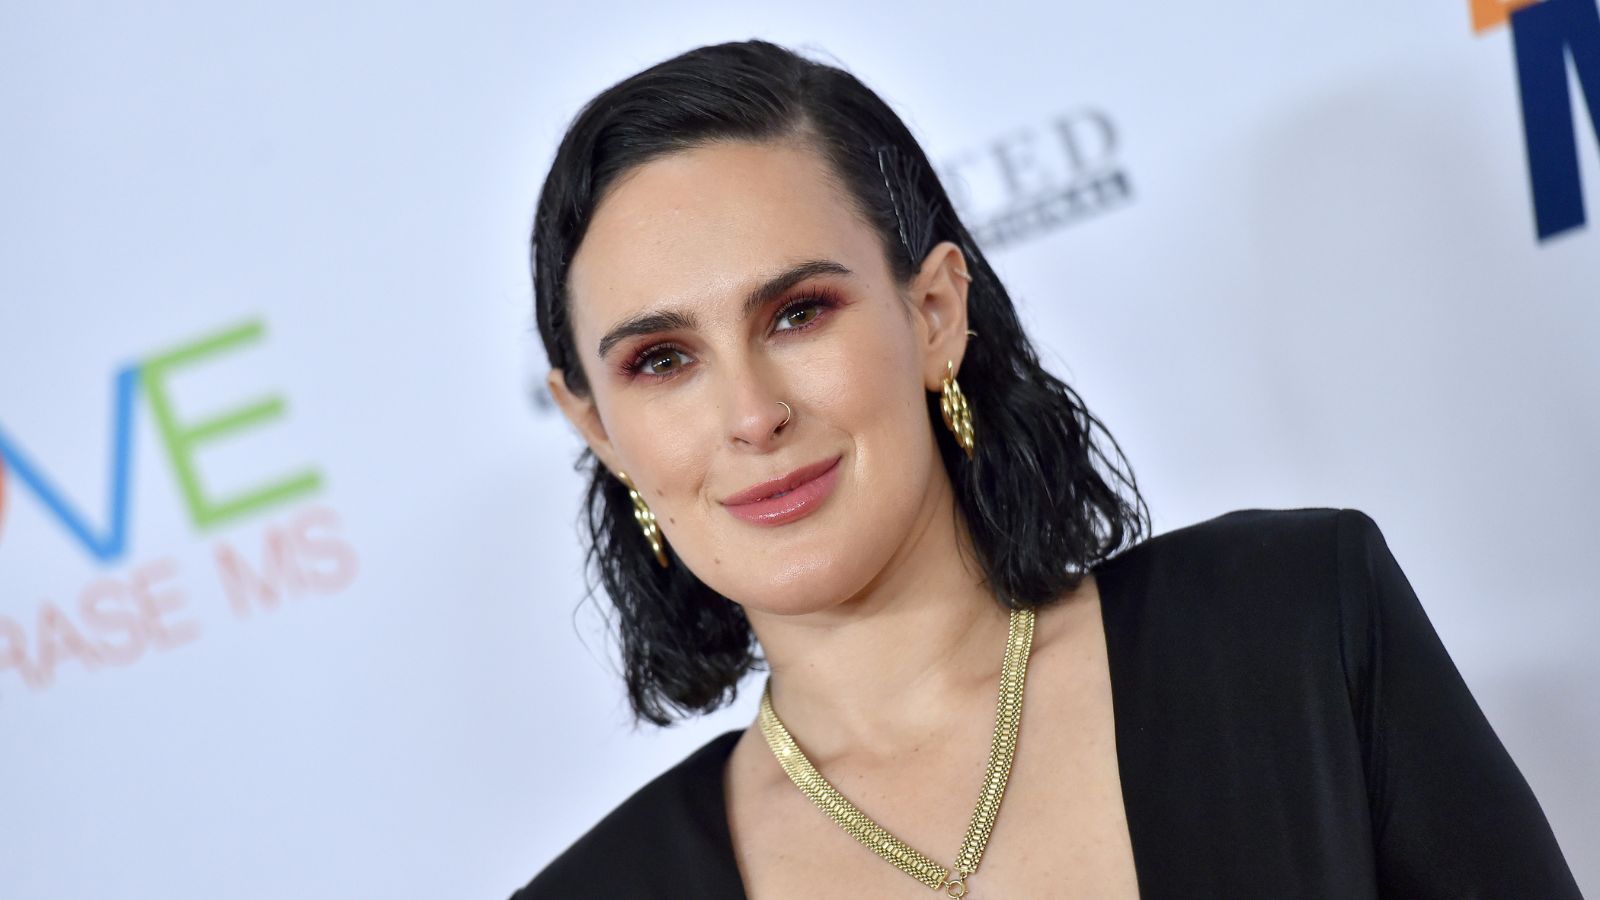 Rumer Willis's home champions a 'calming' aesthetic for her walls